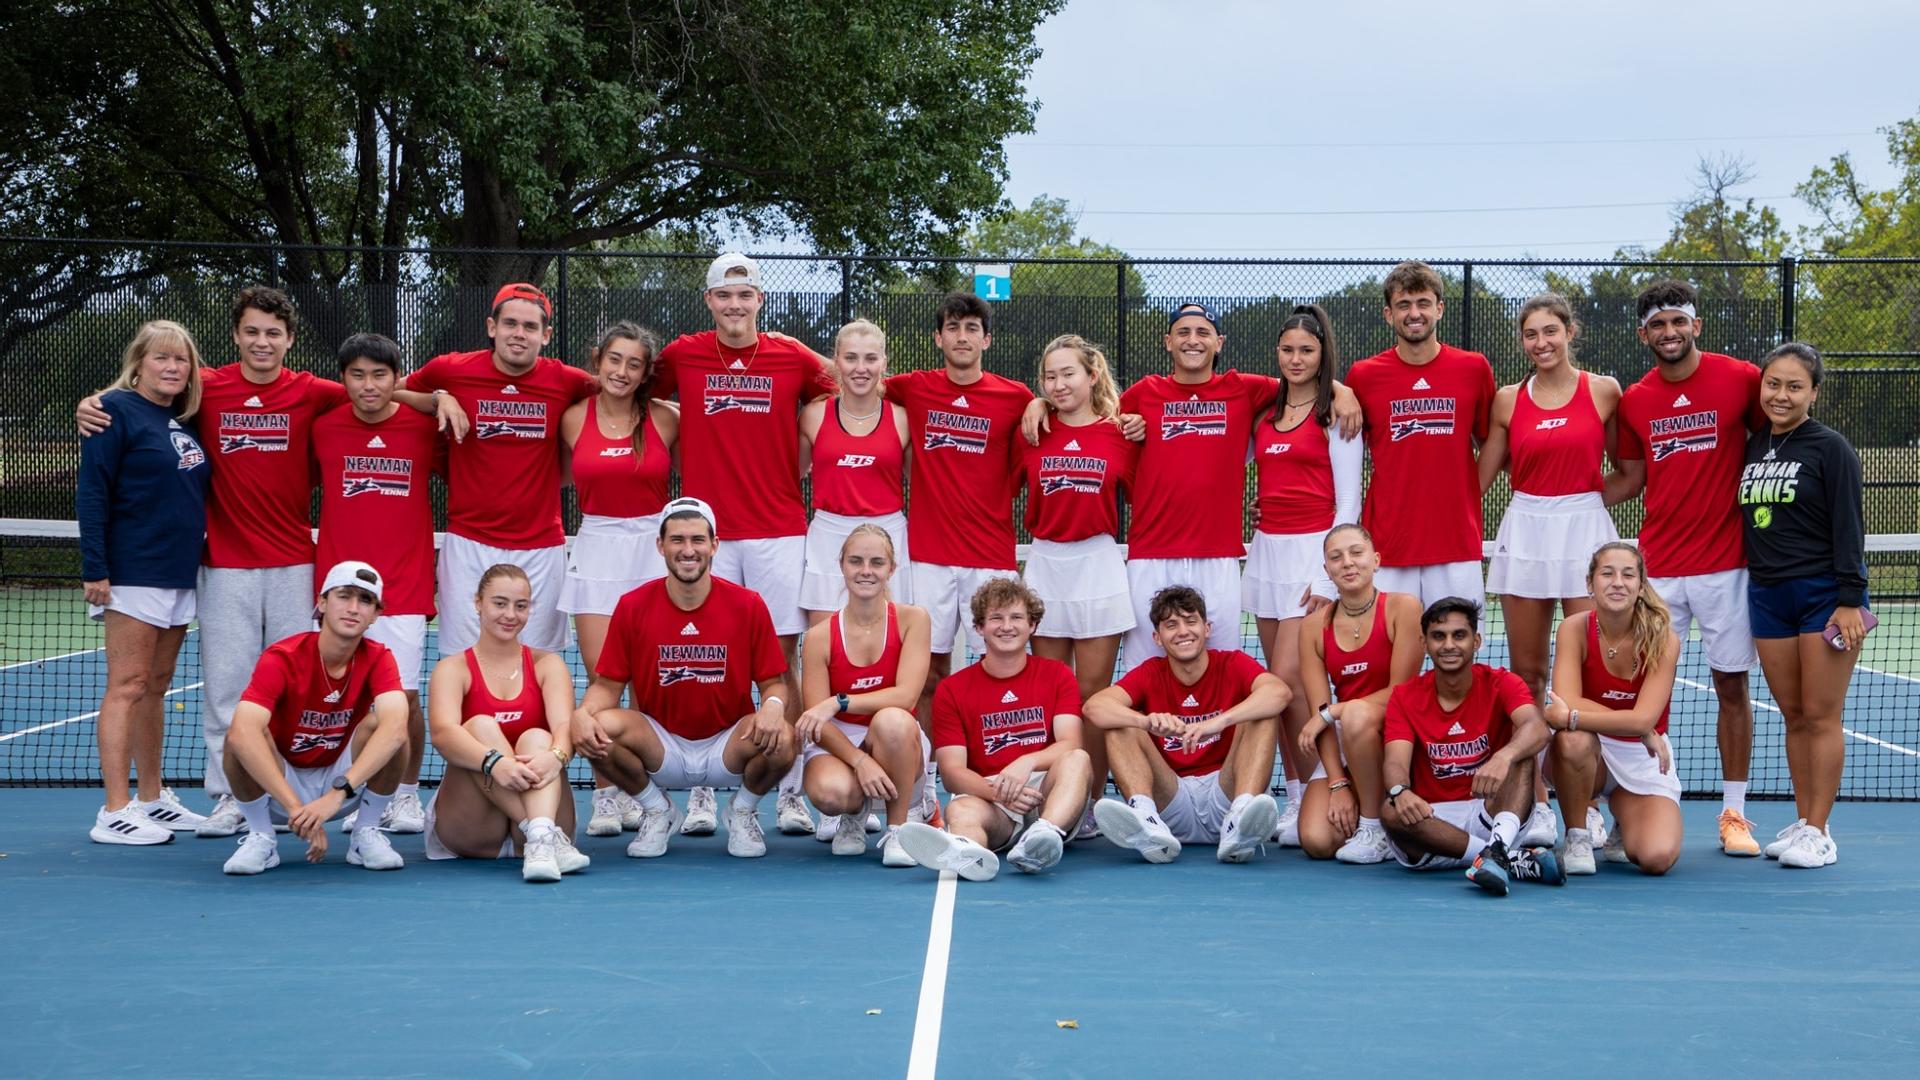 Tennis aces the competition with an undefeated fall record